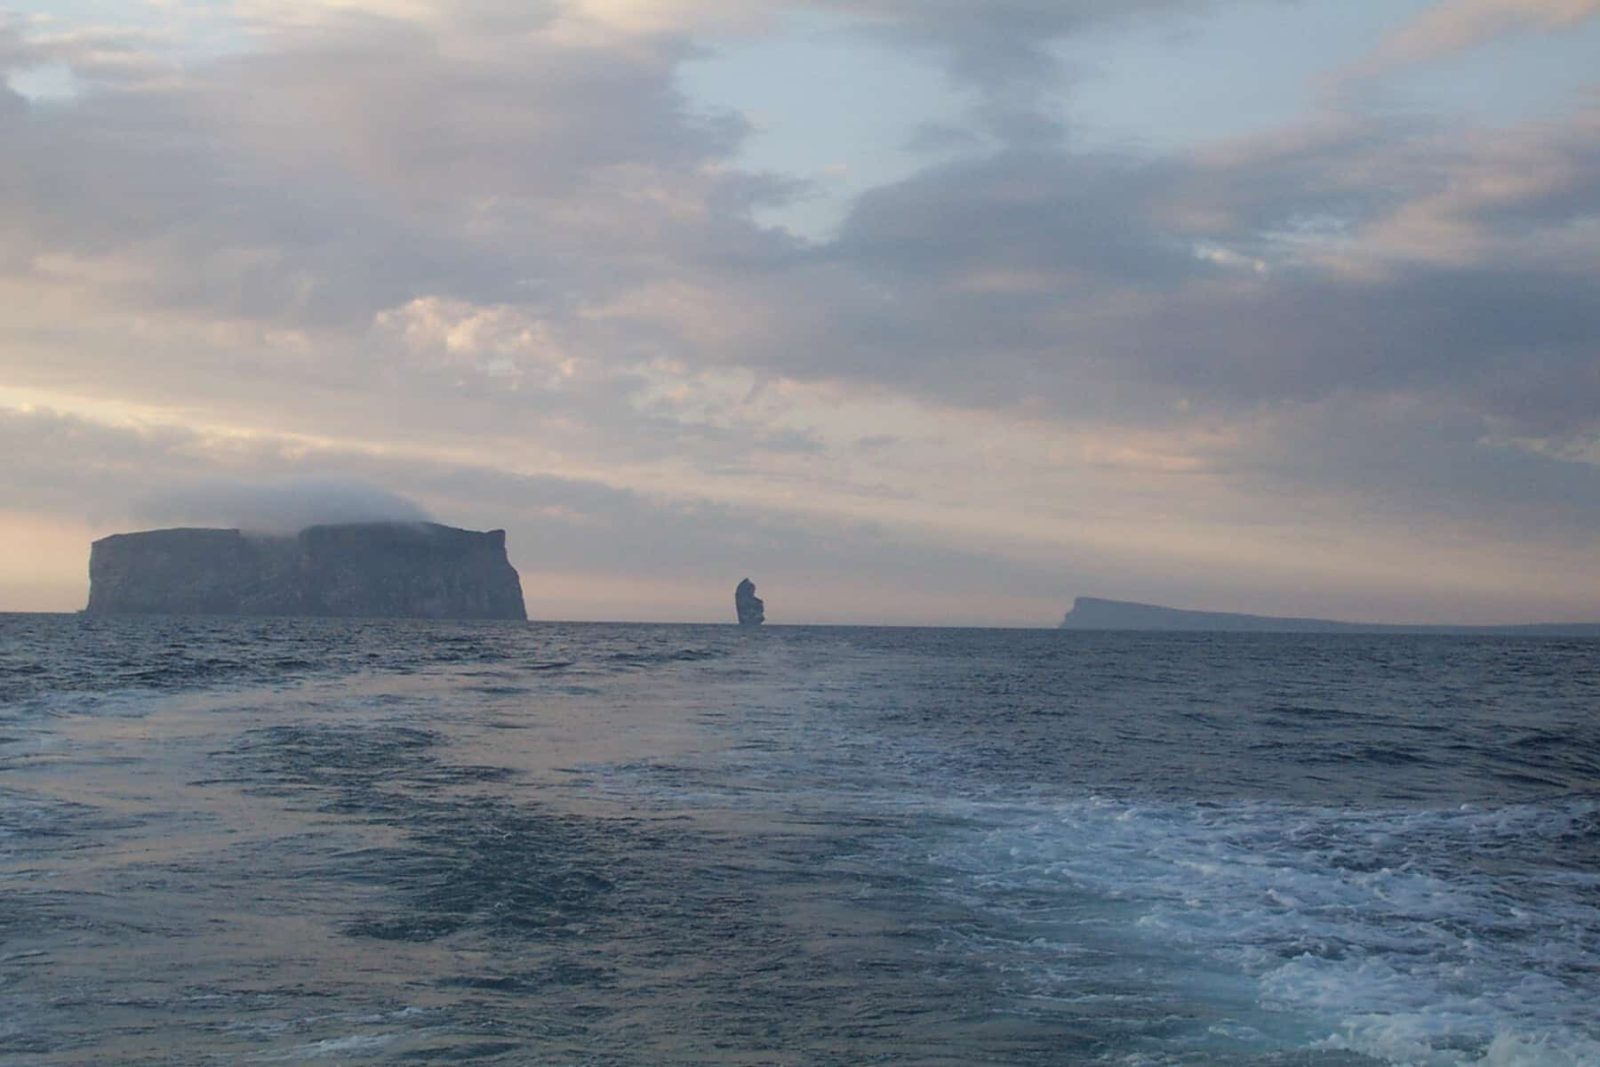 Drangey on the left, Kerling in the middle and the island of Malmey on the right